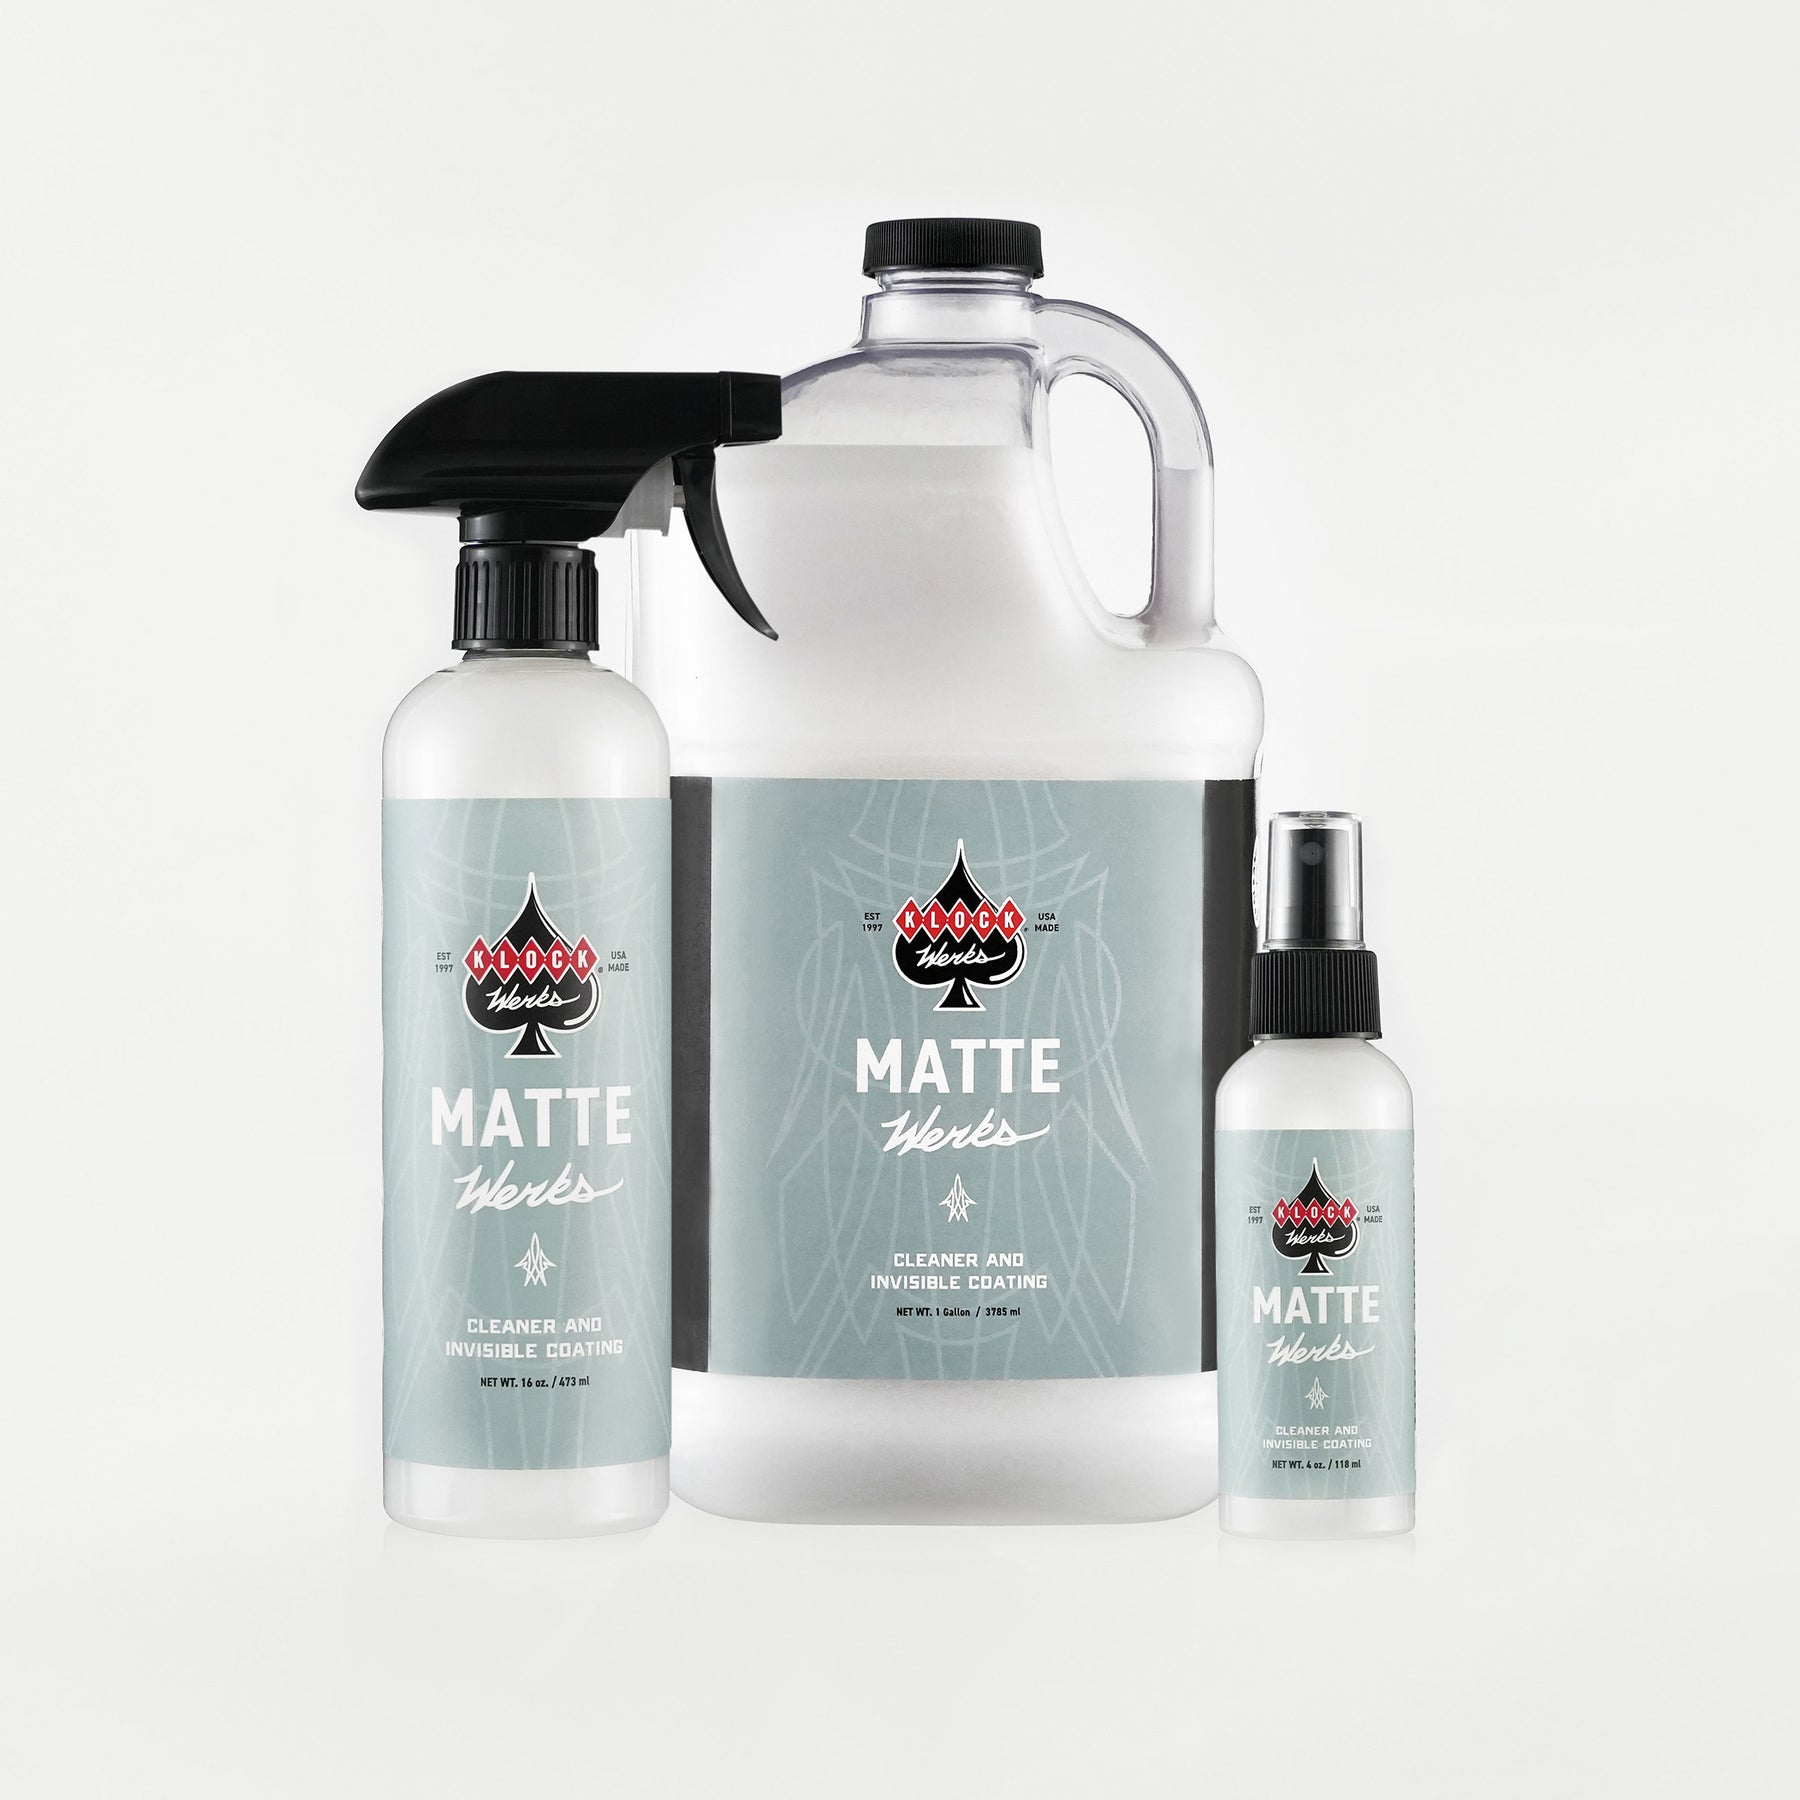 Matte Werks Cleaning Product complete lineup